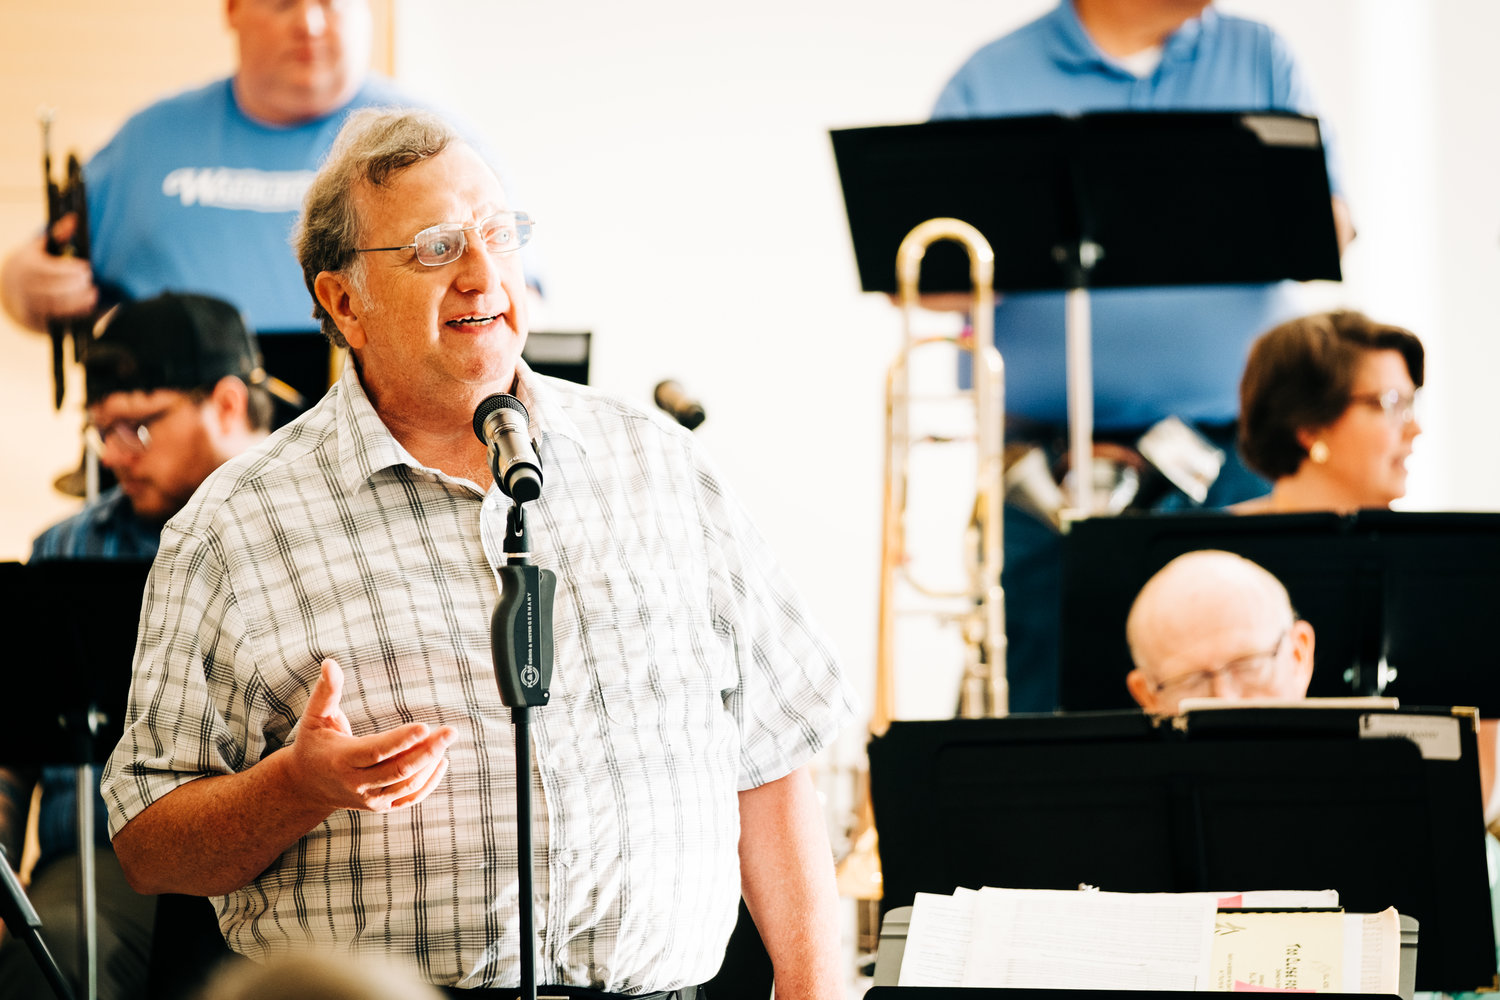 Professor Robert Kehle introduces the band during the Festival of the Arts: Summer Kicks Jazz Concert at the Bicknell Family Center for the Arts on Monday.